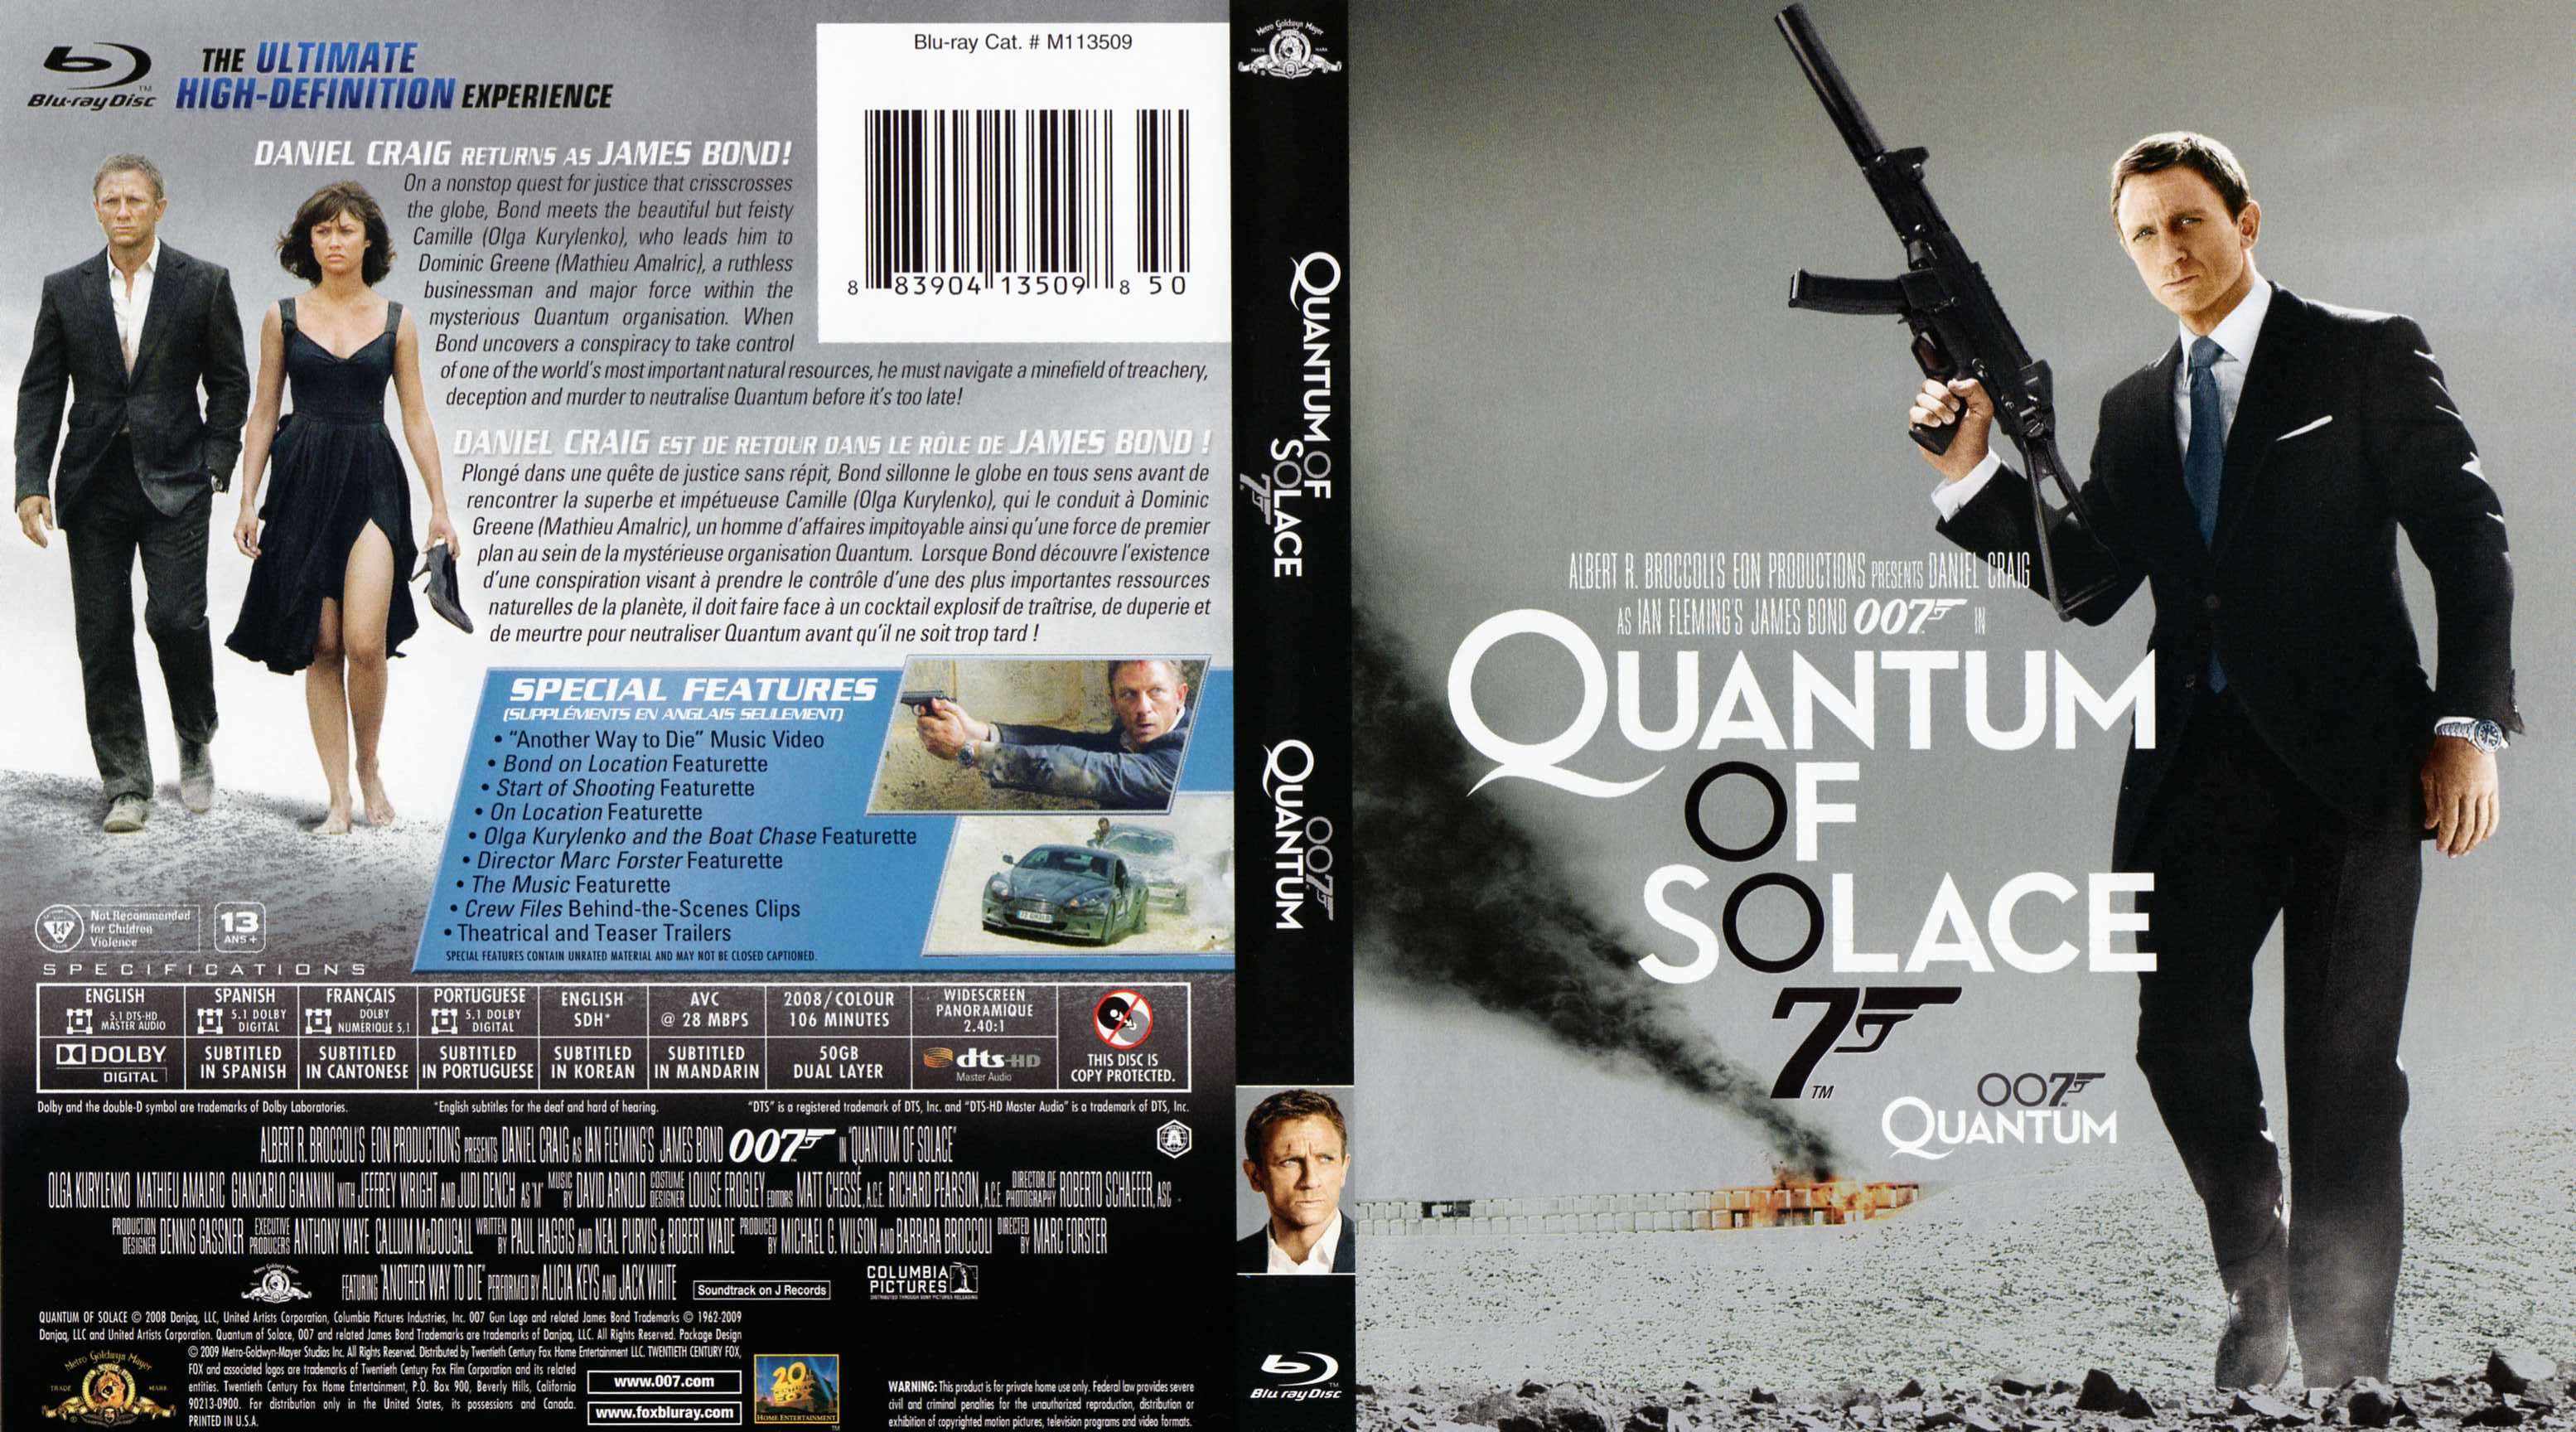 Jaquette DVD James Bond 007 Quantum of solace Zone 1 (BLU-RAY)